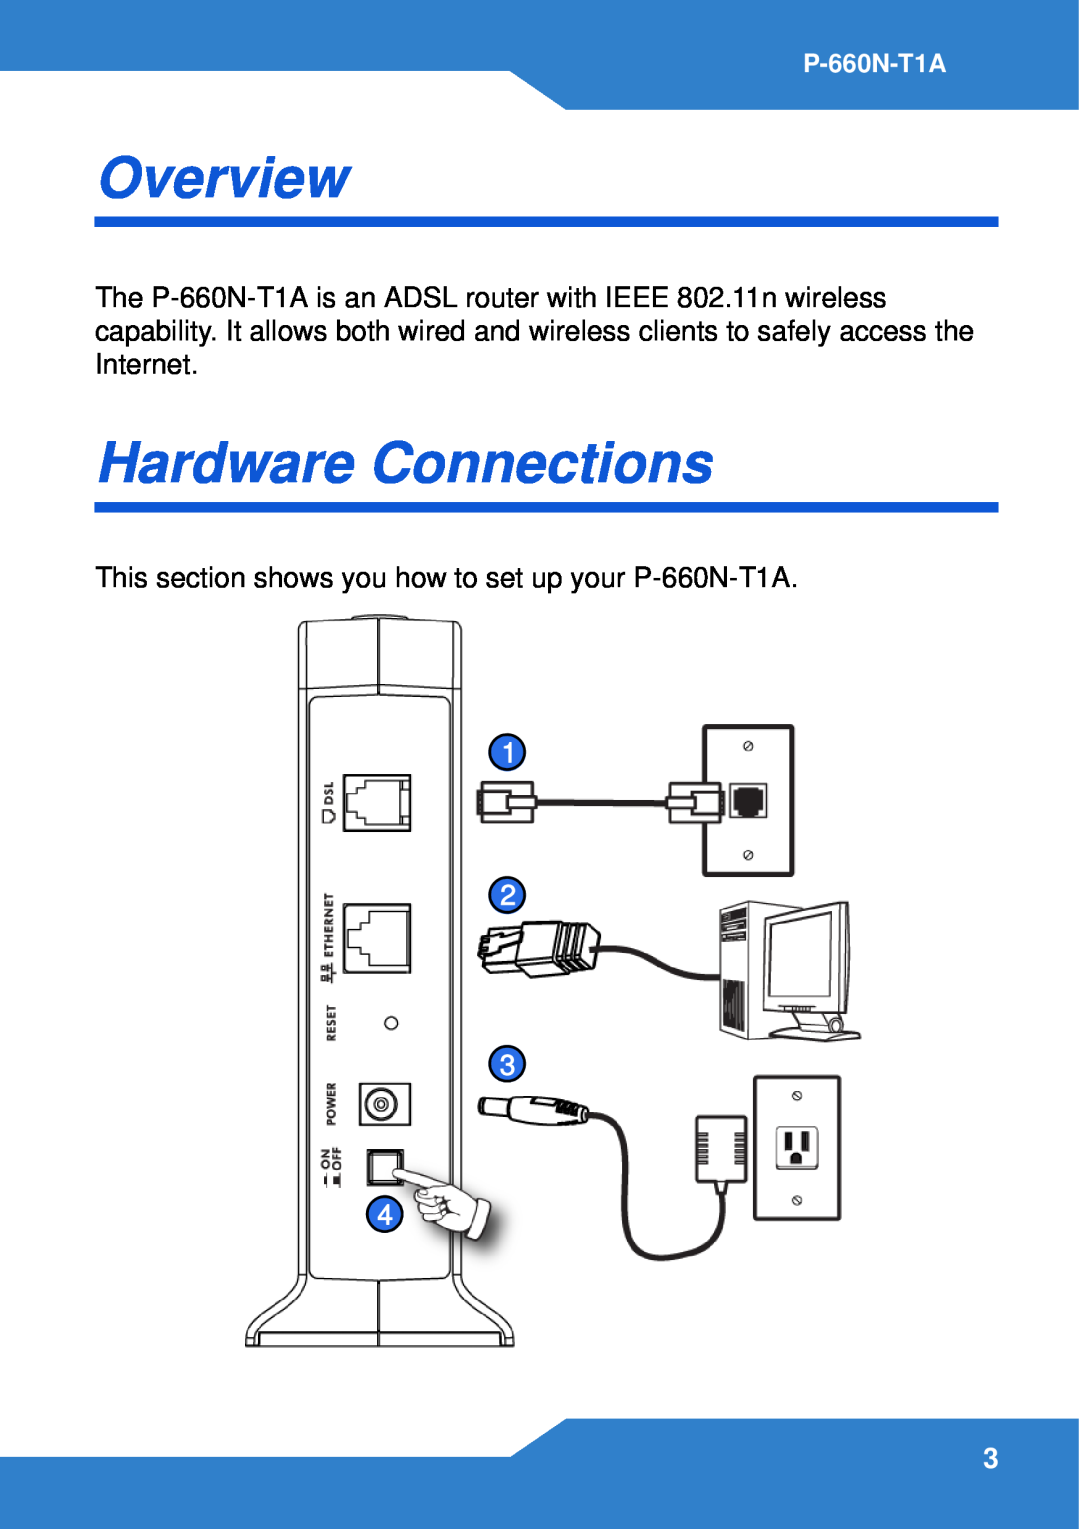 ZyXEL Communications manual Overview, Hardware Connections, This section shows you how to set up your P-660N-T1A 